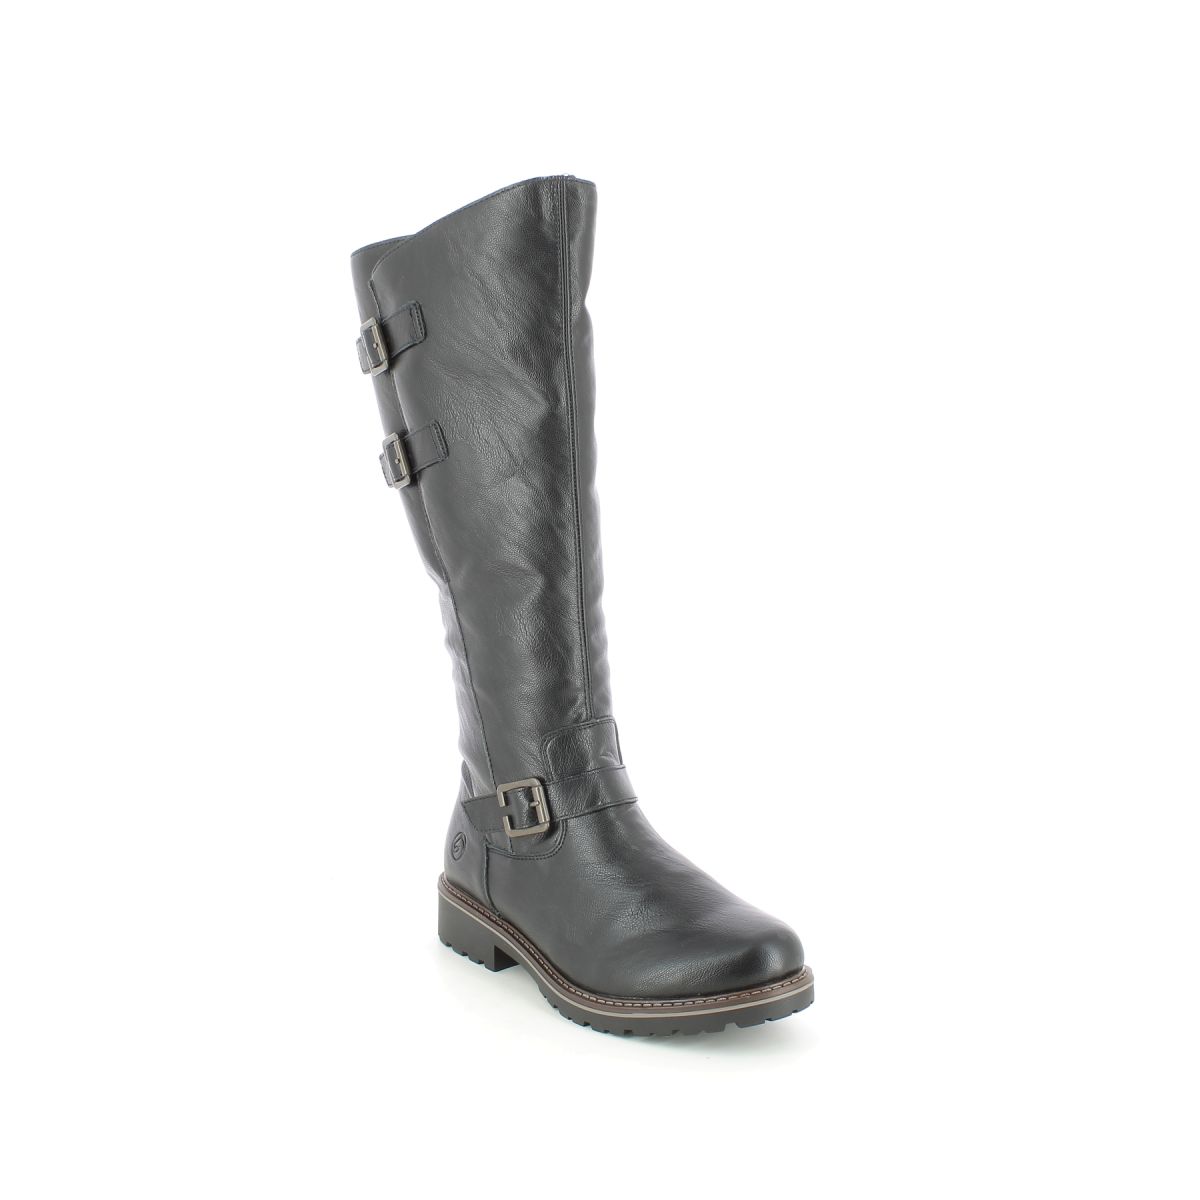 Remonte Indah Shearling Black Womens Knee-High Boots R6590-01 In Size 39 In Plain Black